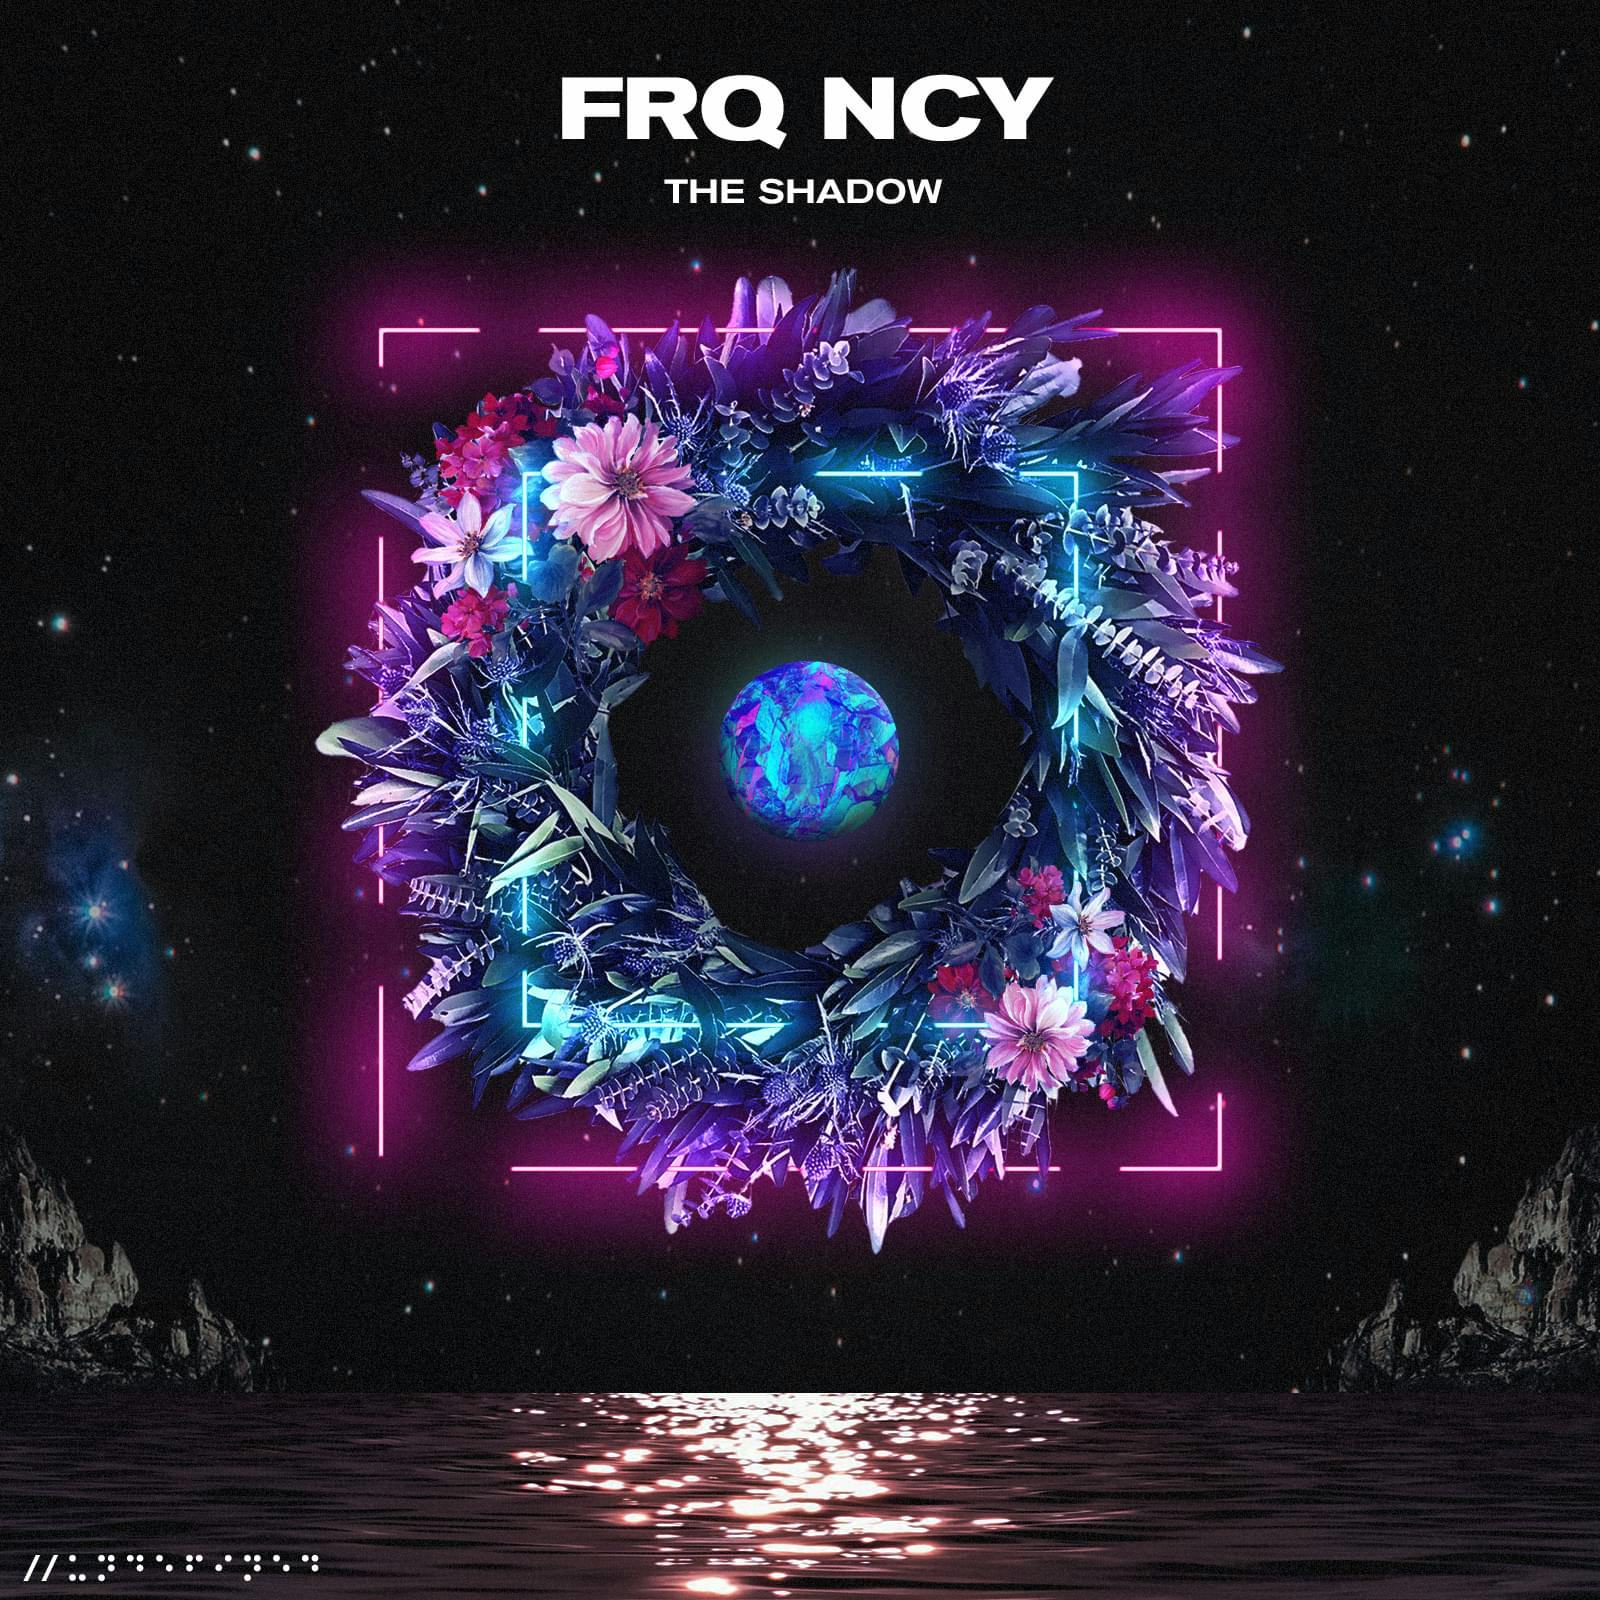 Cover art for The Shadow by FRQ NCY